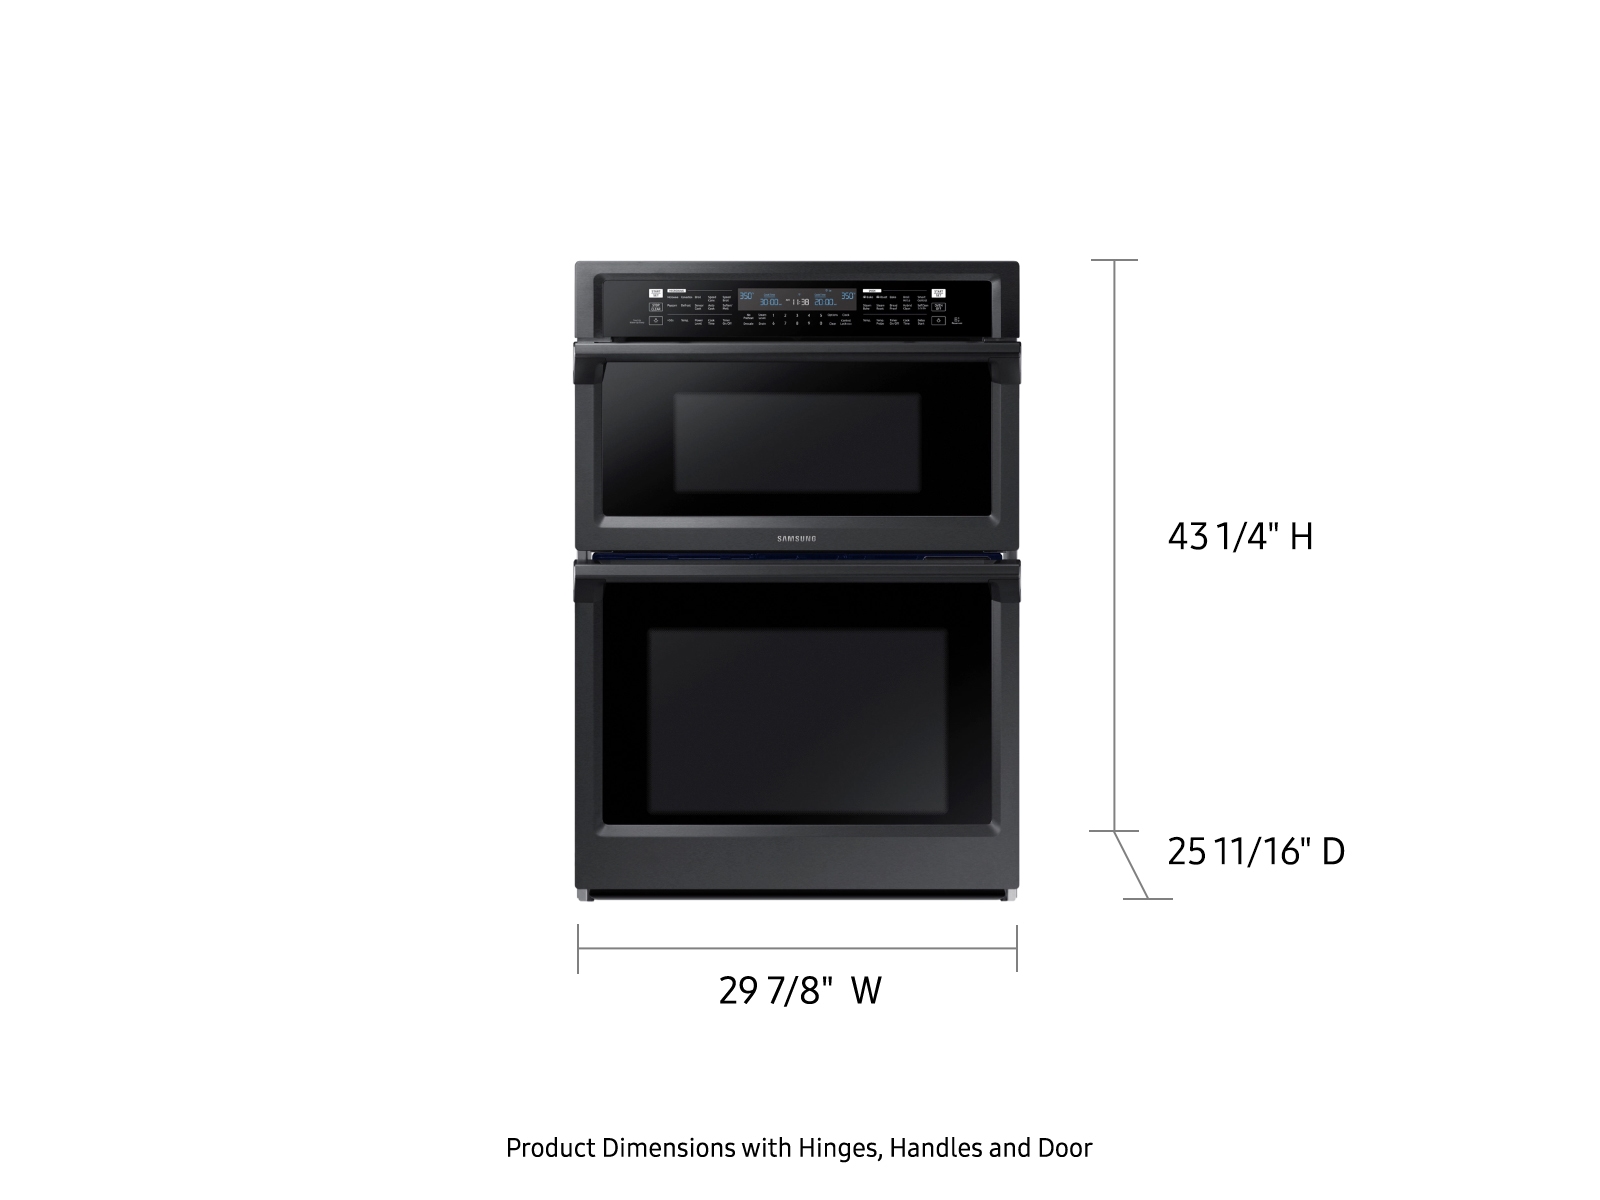 Samsung 30 Stainless Steel Oven/Microwave Combination Electric Wall Oven